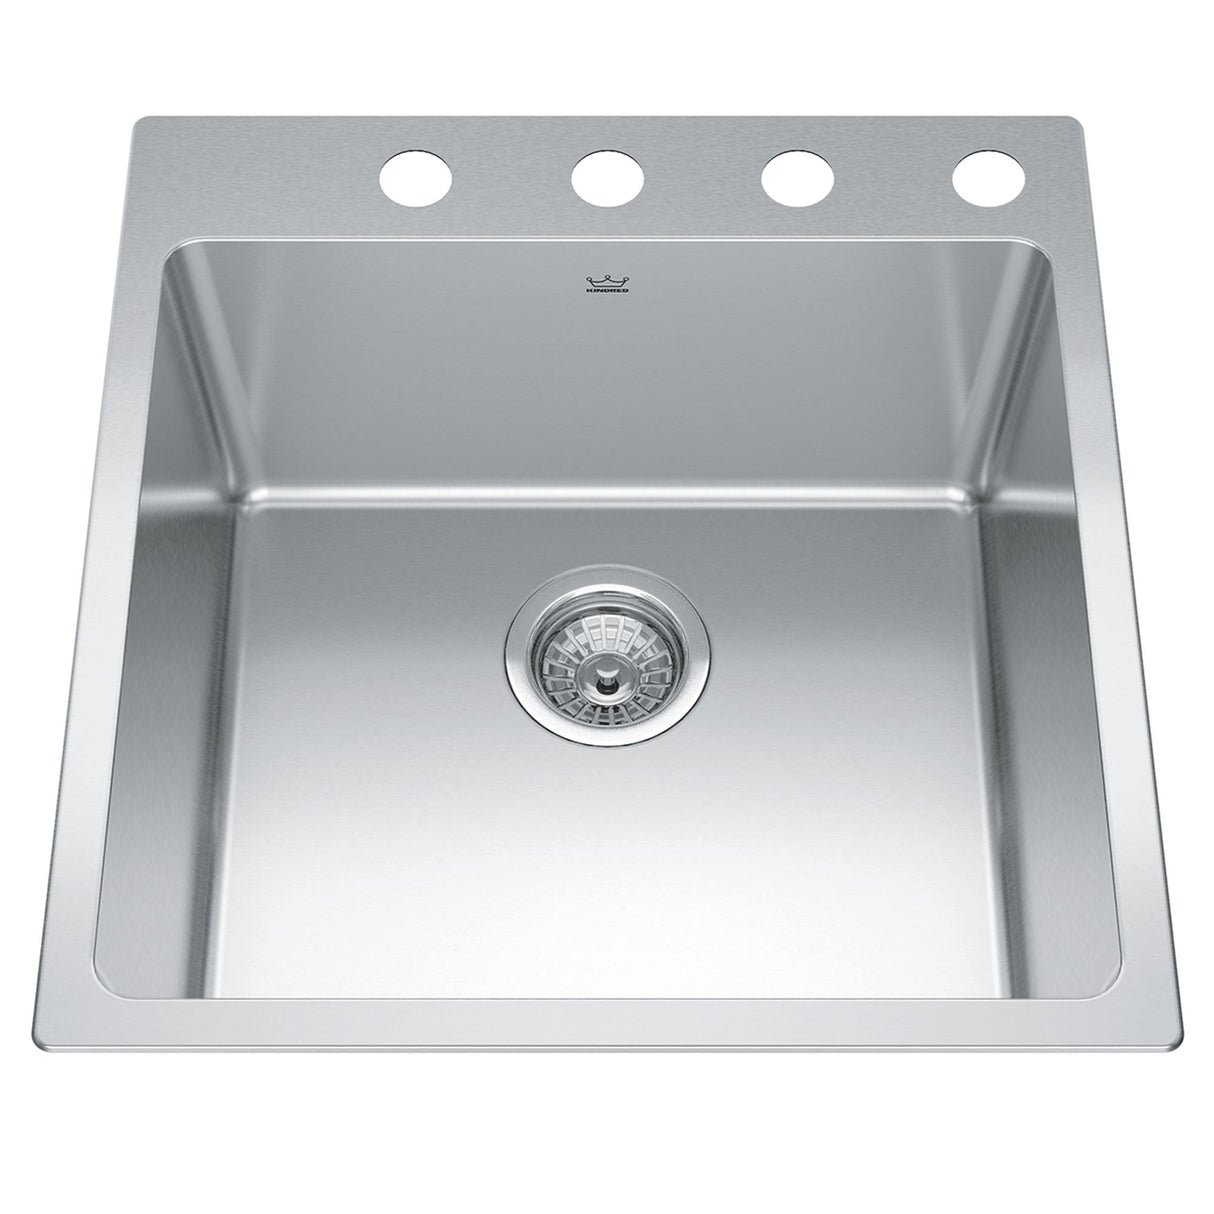 KINDRED BSL2120-9-4N Brookmore 20-in LR x 20.9-in FB x 9-in DP Drop in Single Bowl Stainless Steel Sink In Commercial Satin Finish